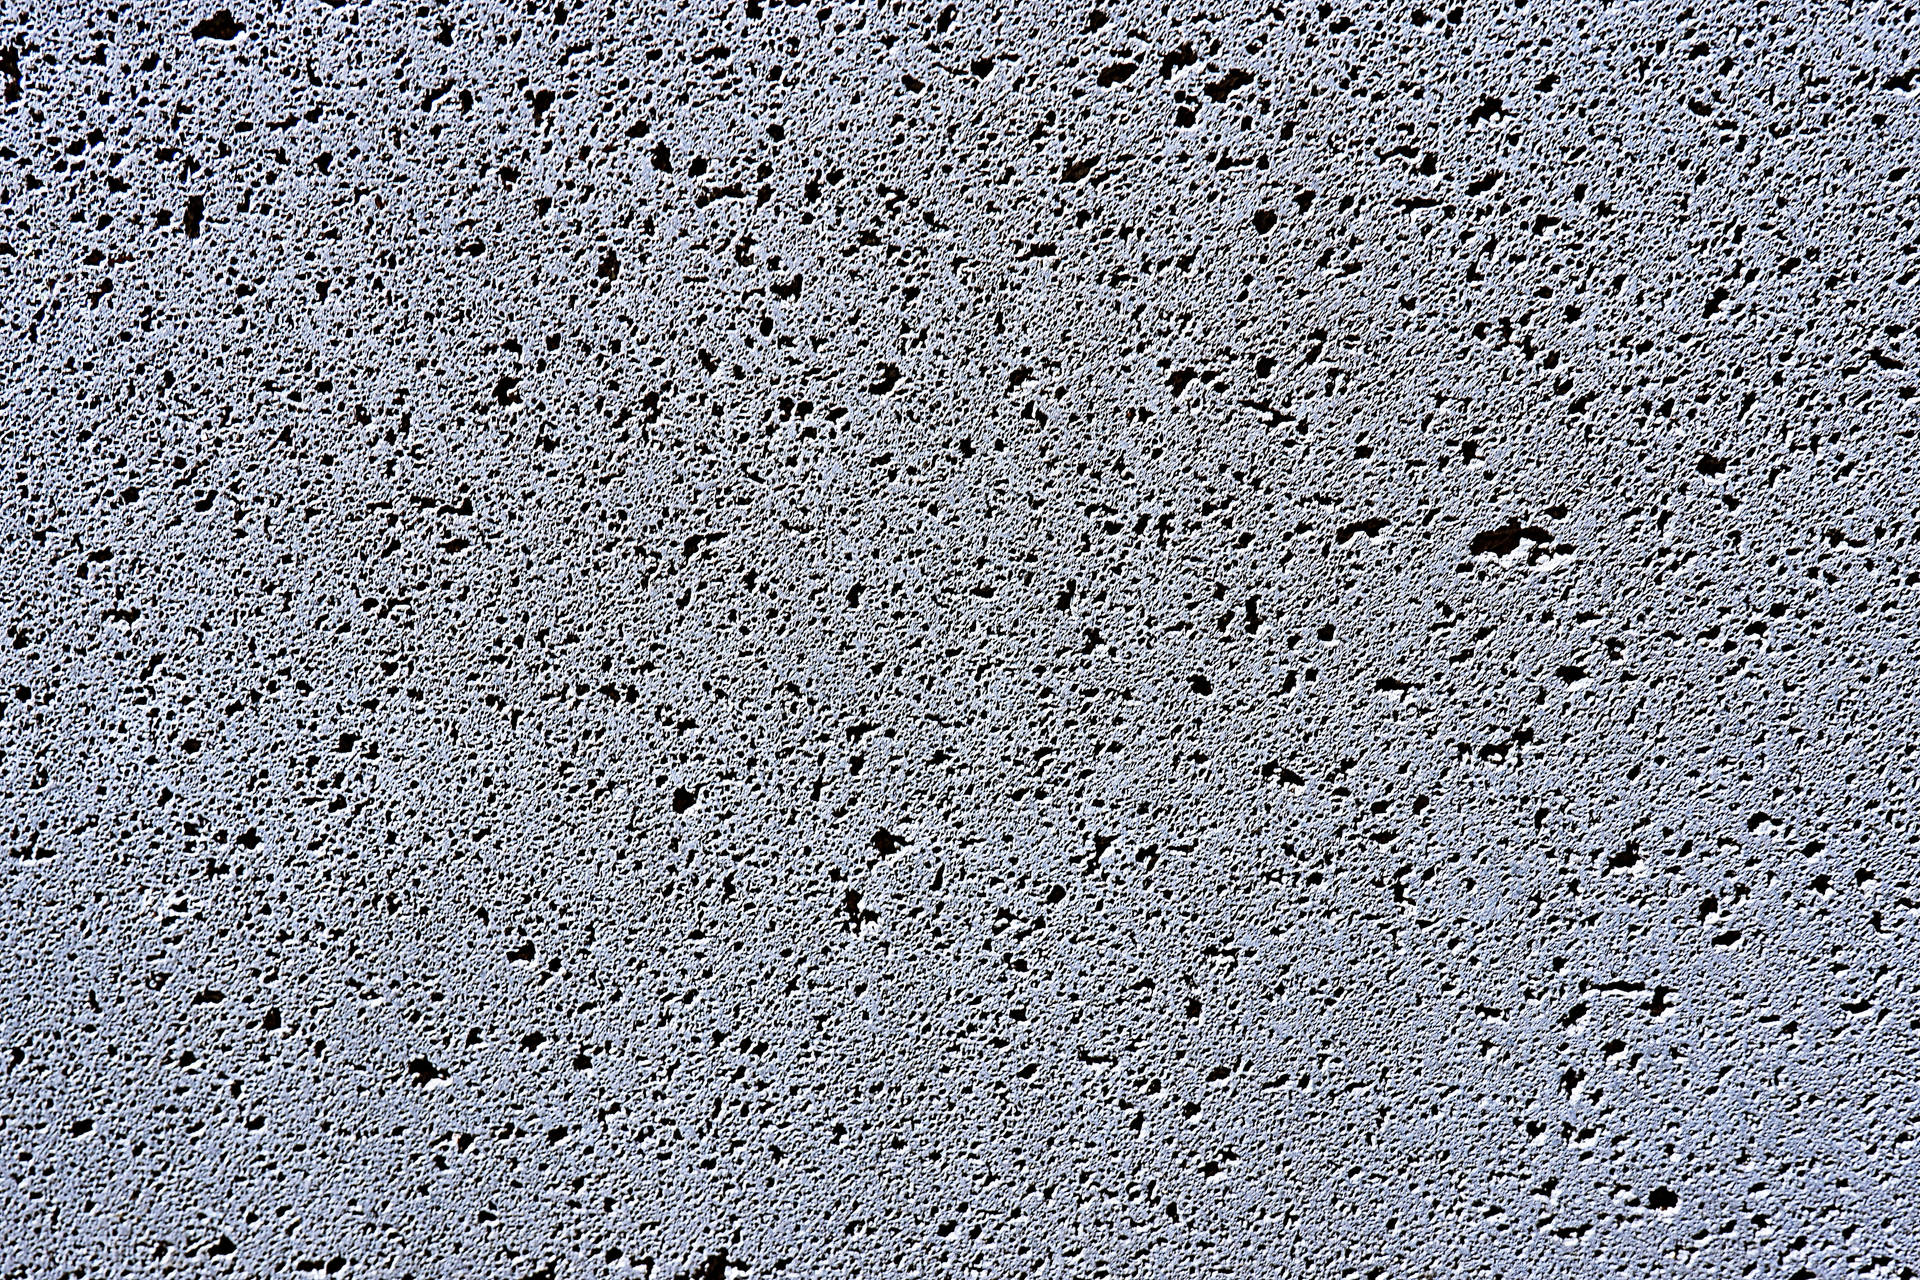 Concrete 5250X3500 Wallpaper and Background Image